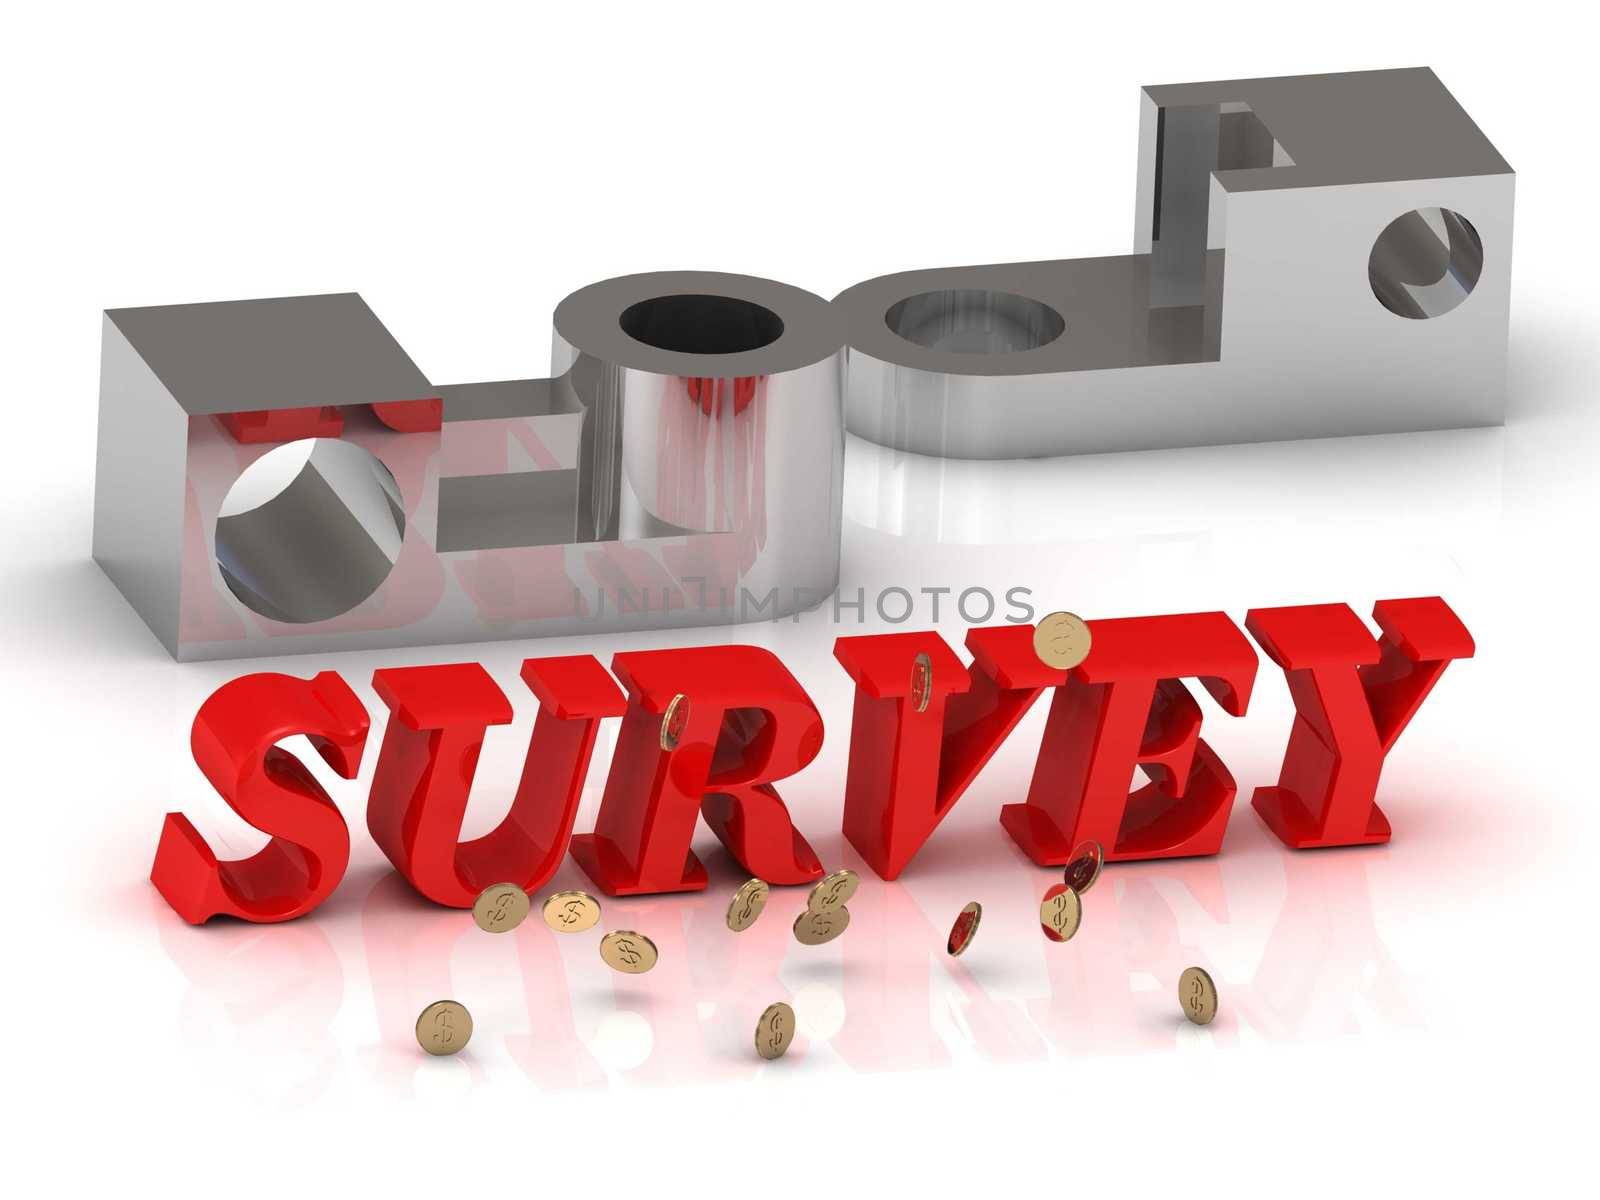 SURVEY- inscription of red letters and silver details by GreenMost